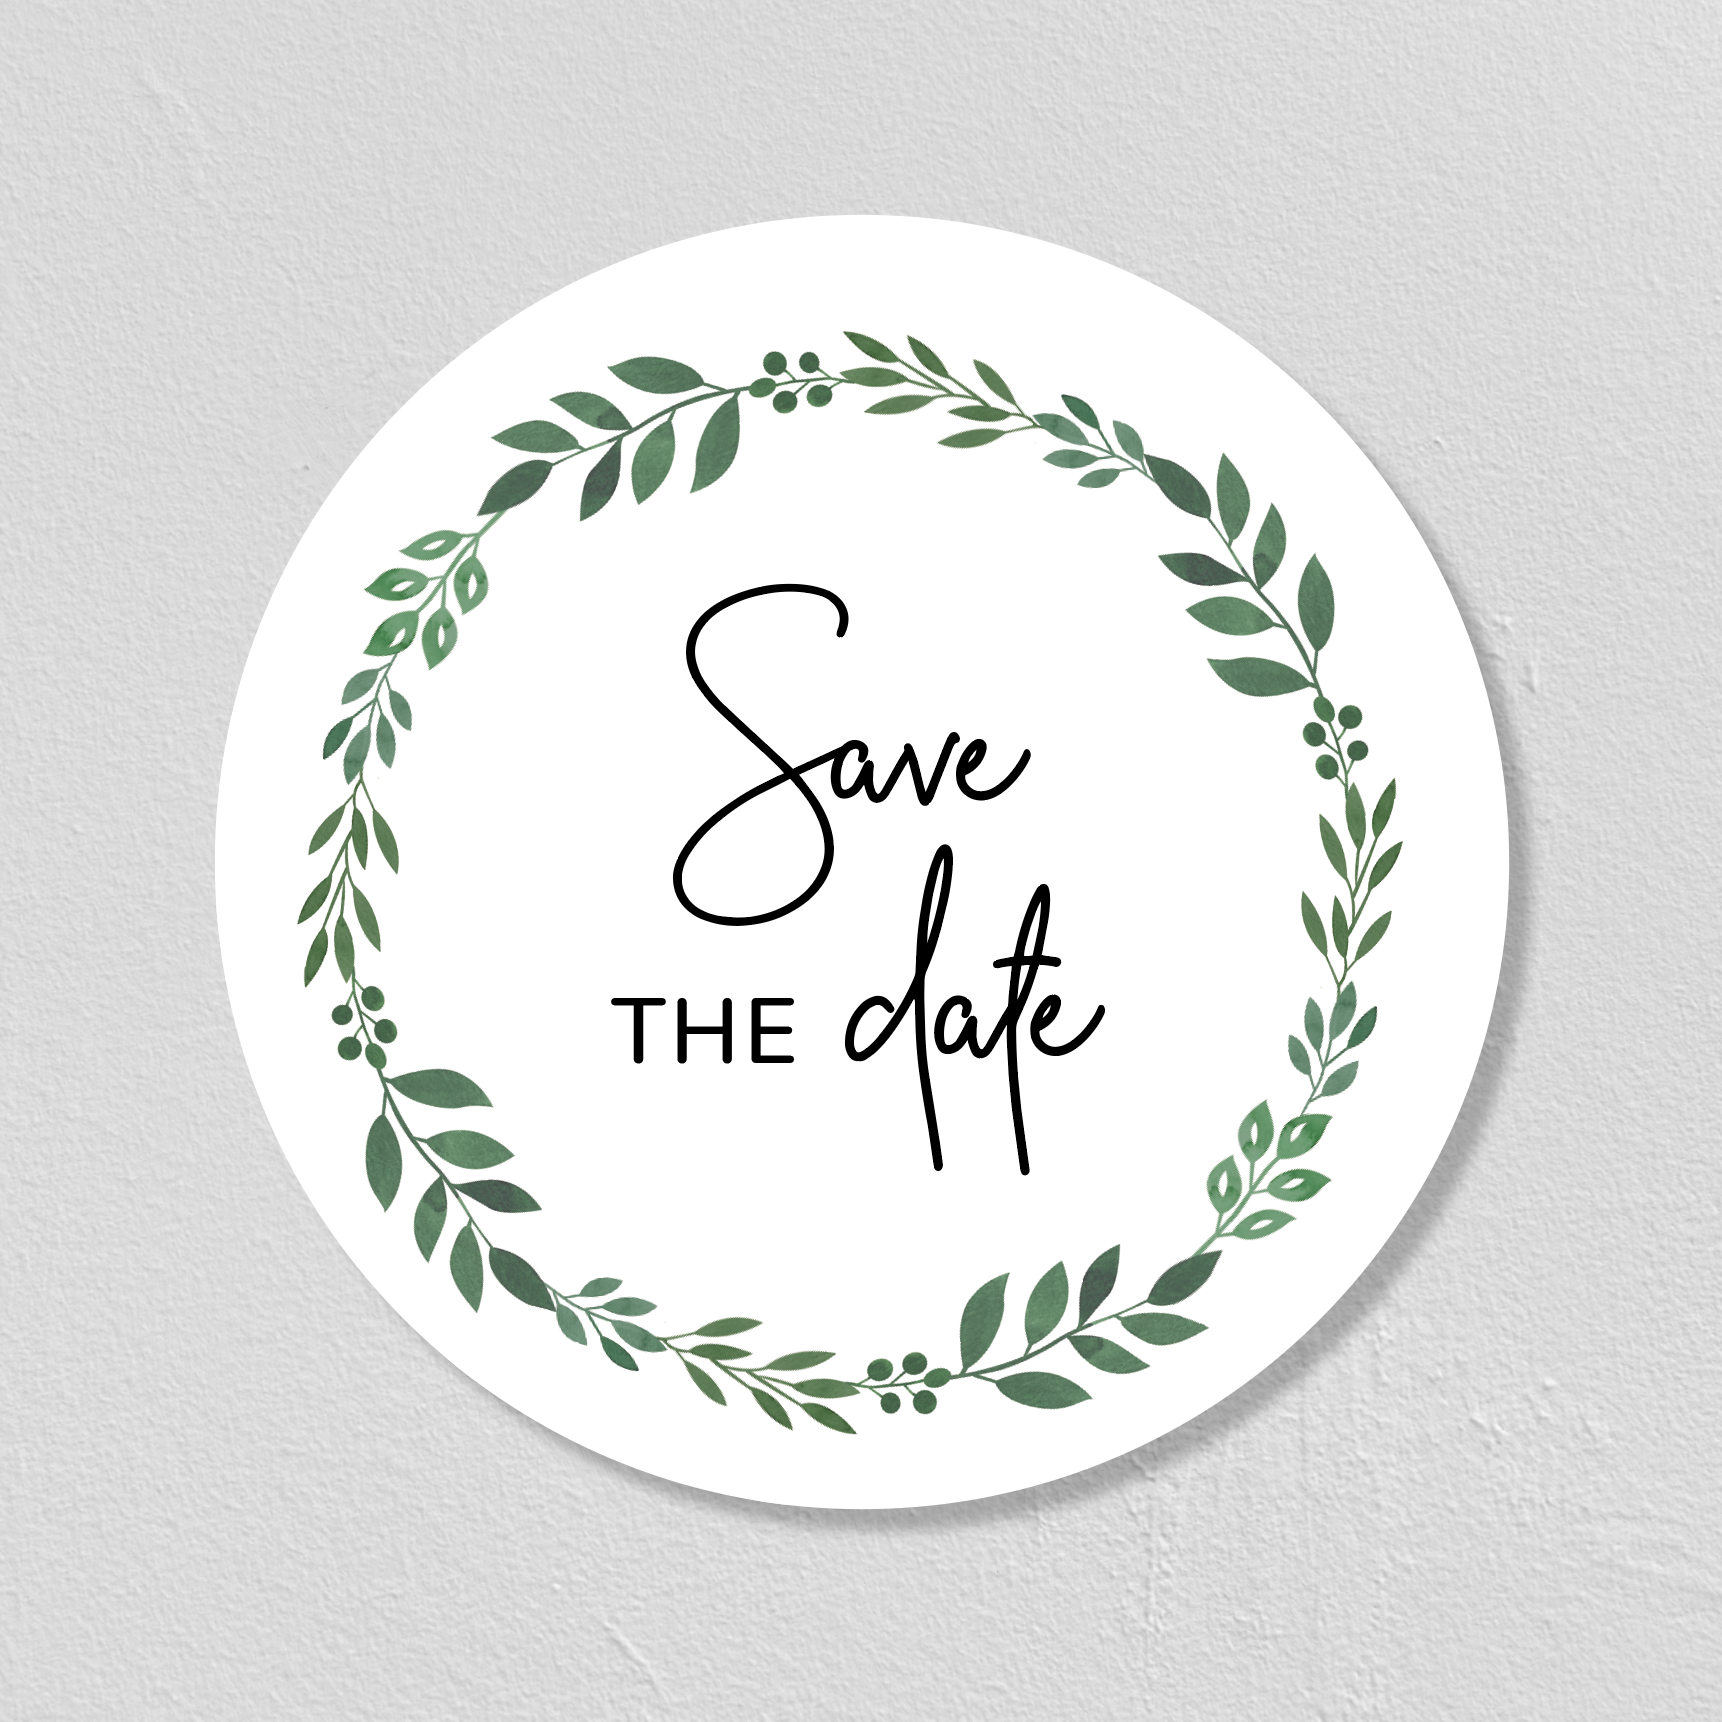 STICKERS "SAVE THE DATE" 5CM - SEVEN PAPER